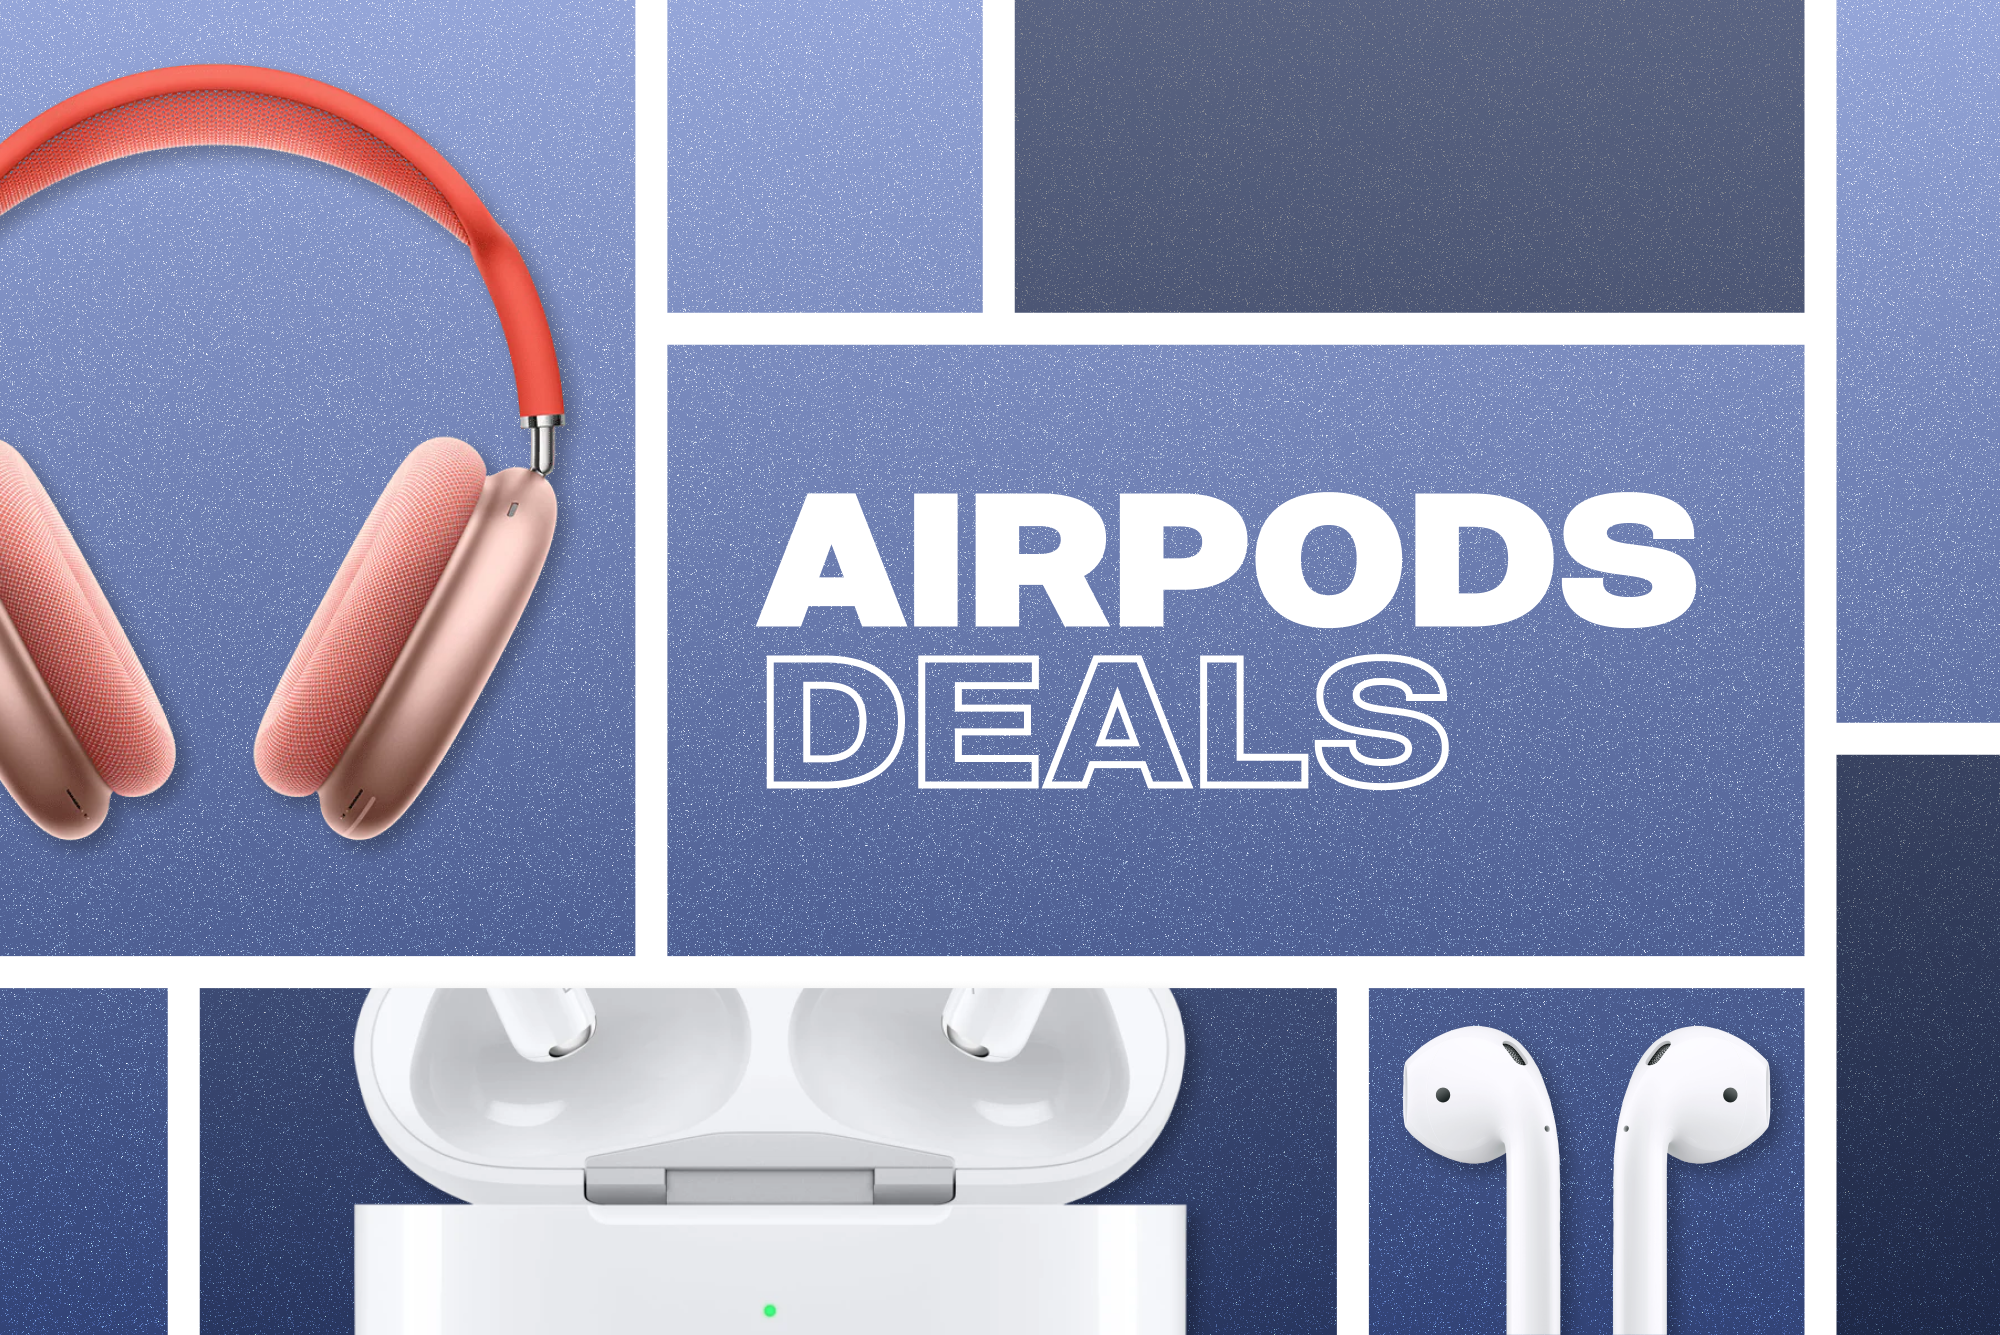 https://www.themanual.com/wp-content/uploads/sites/9/2021/06/prime-day-2020-airpods-deals.png?fit=800%2C800&p=1